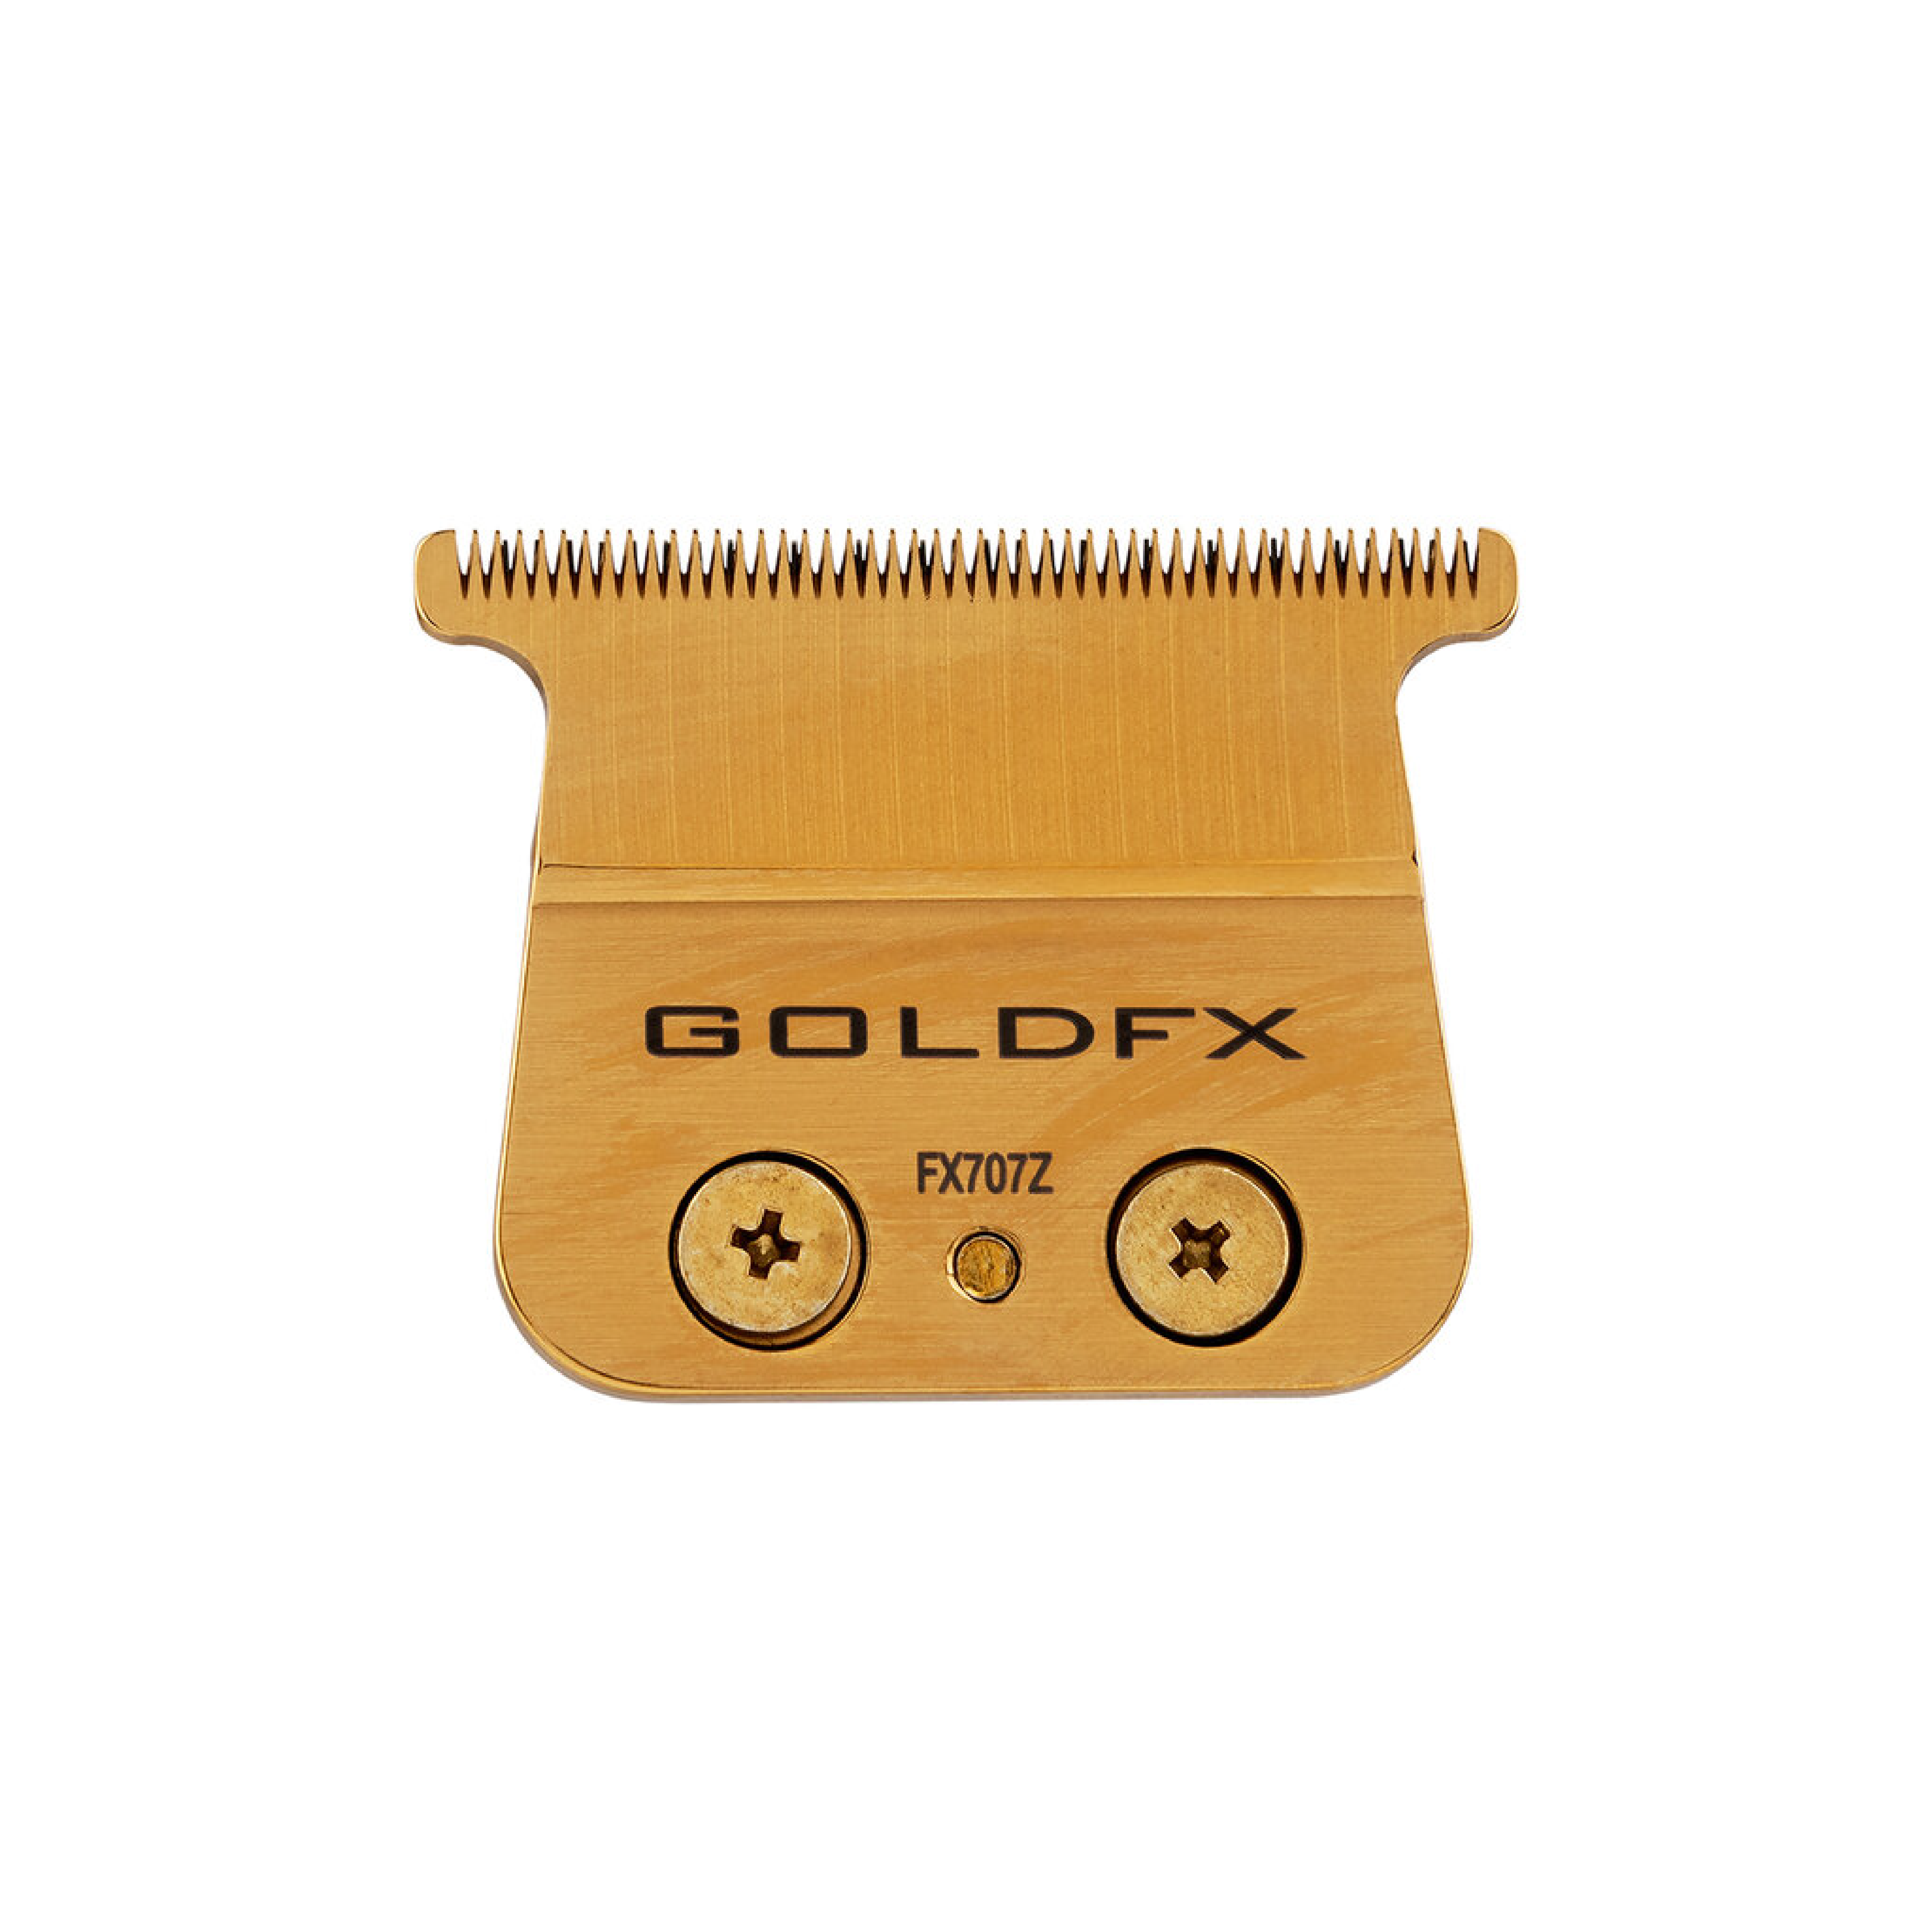 Babyliss Pro Outliner Gold Trimmer Replacement Blade - FX707Z